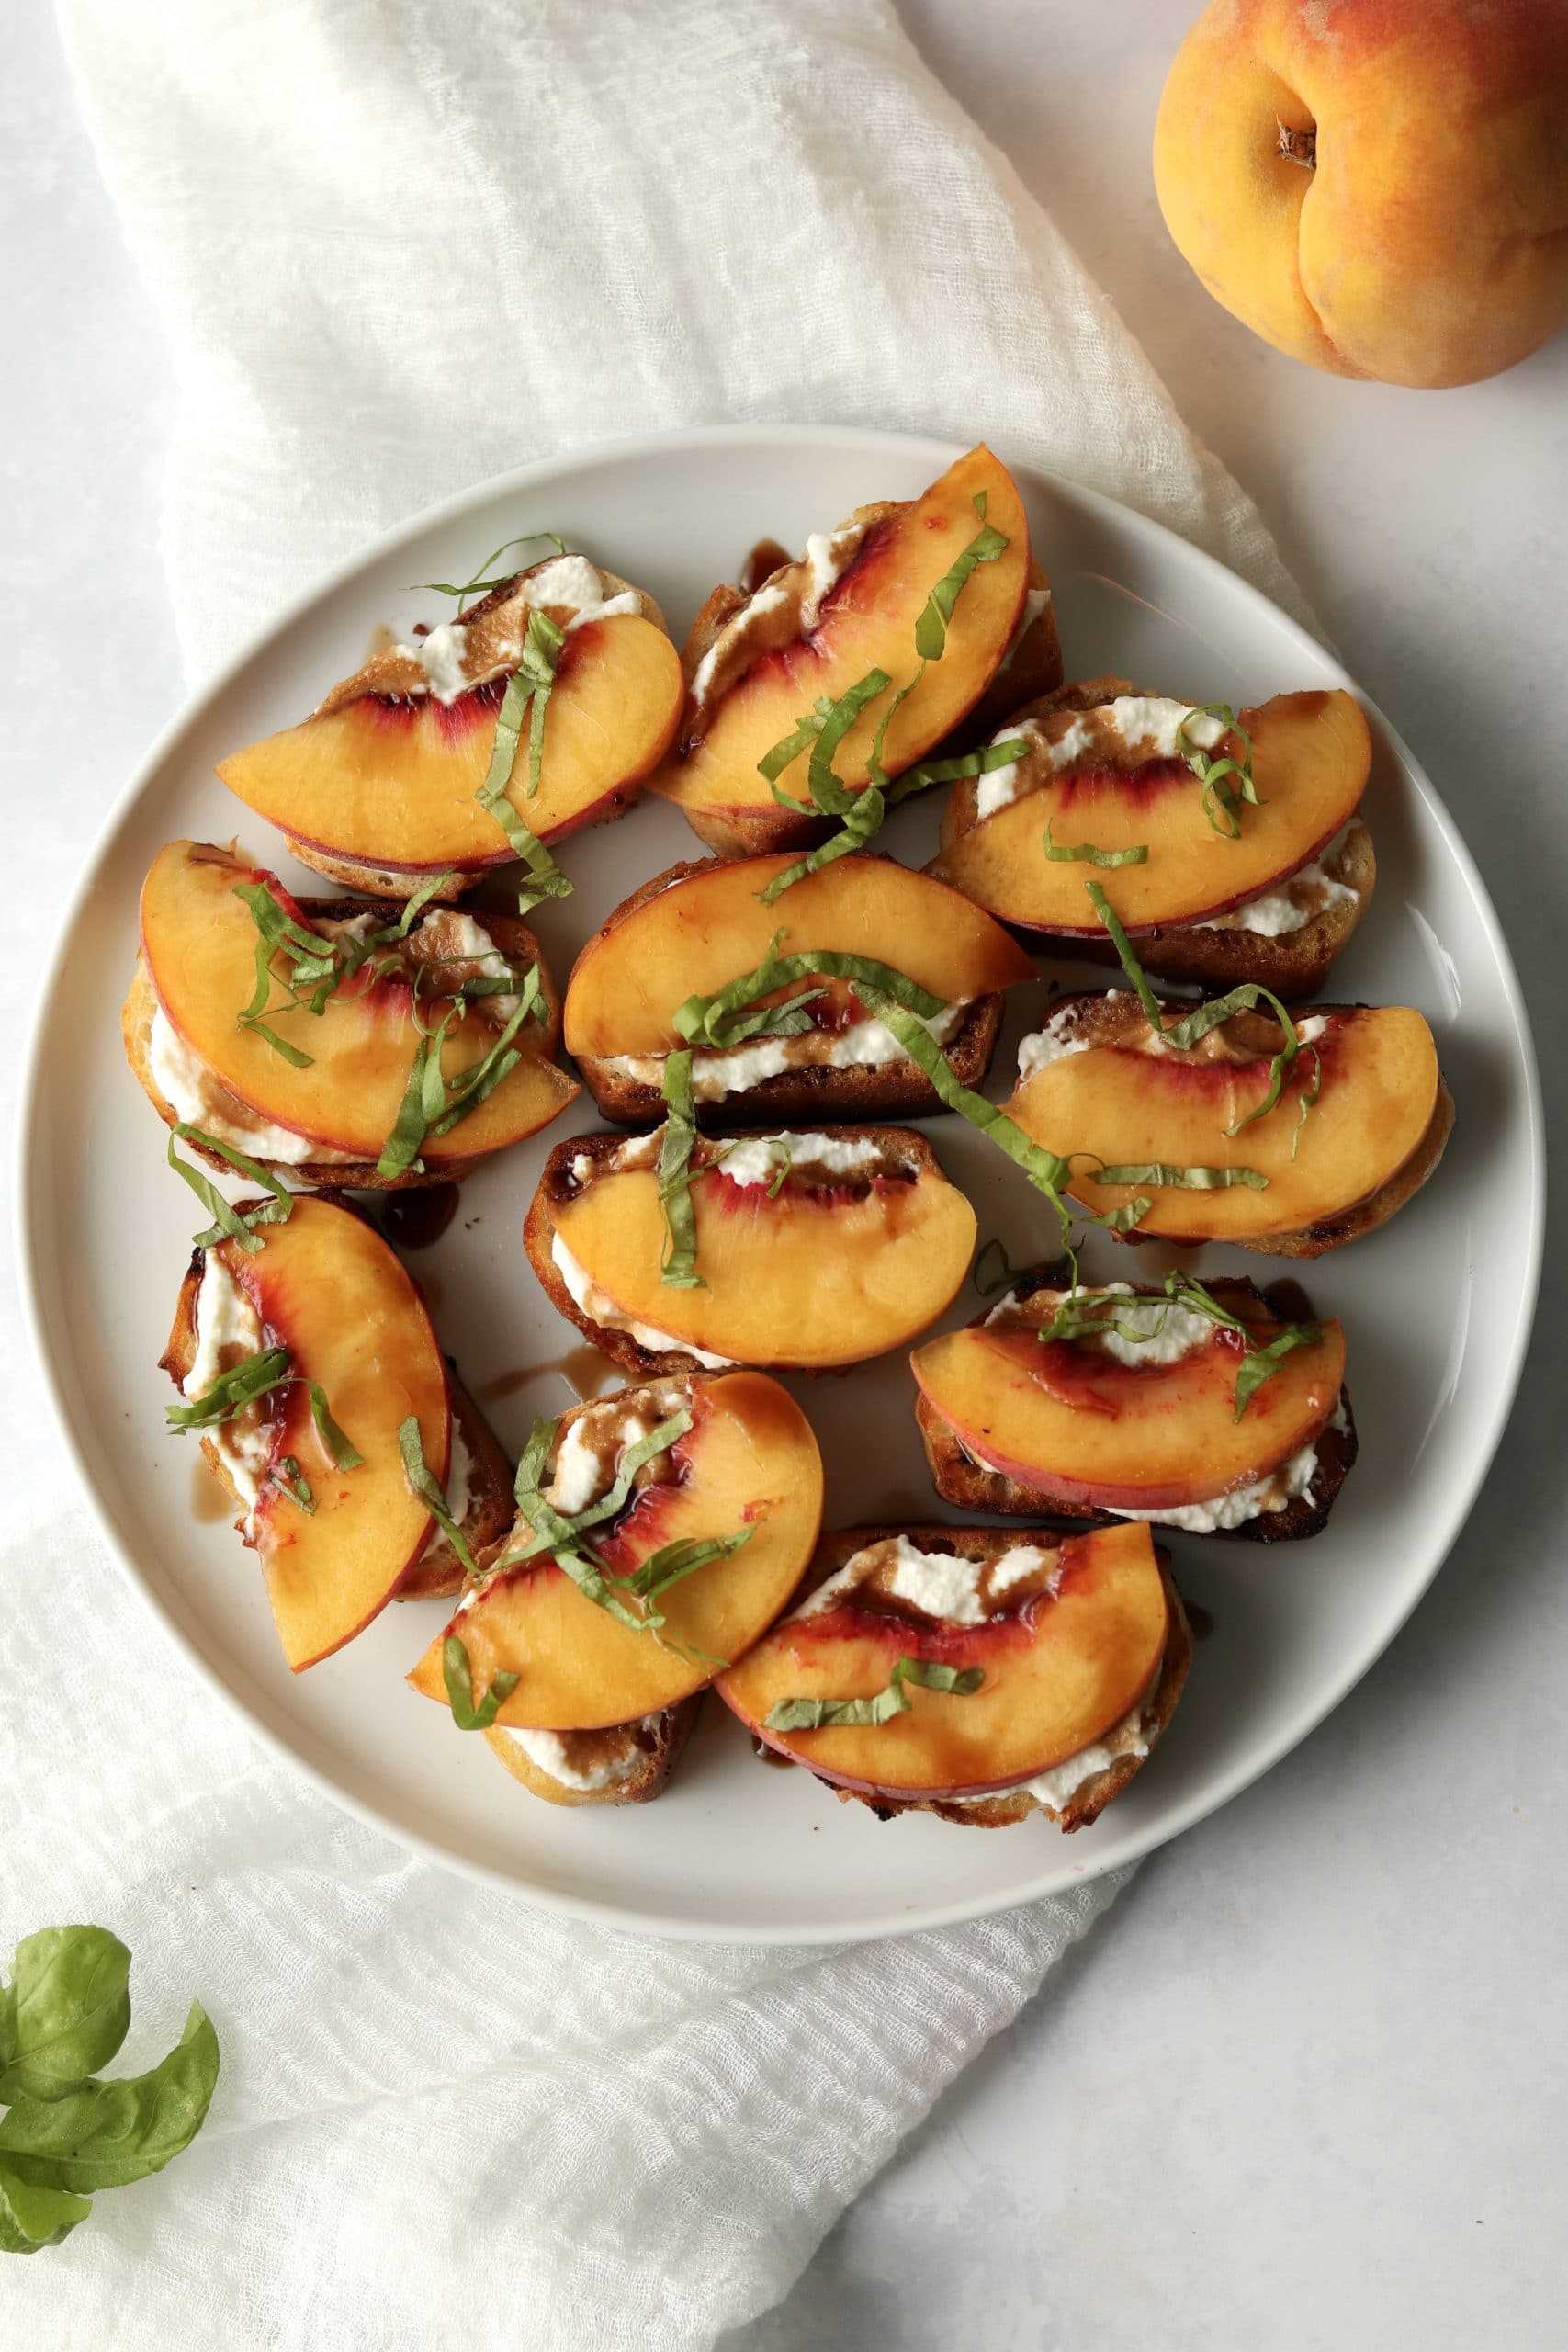 Plate of crostini with ricotta and peaches